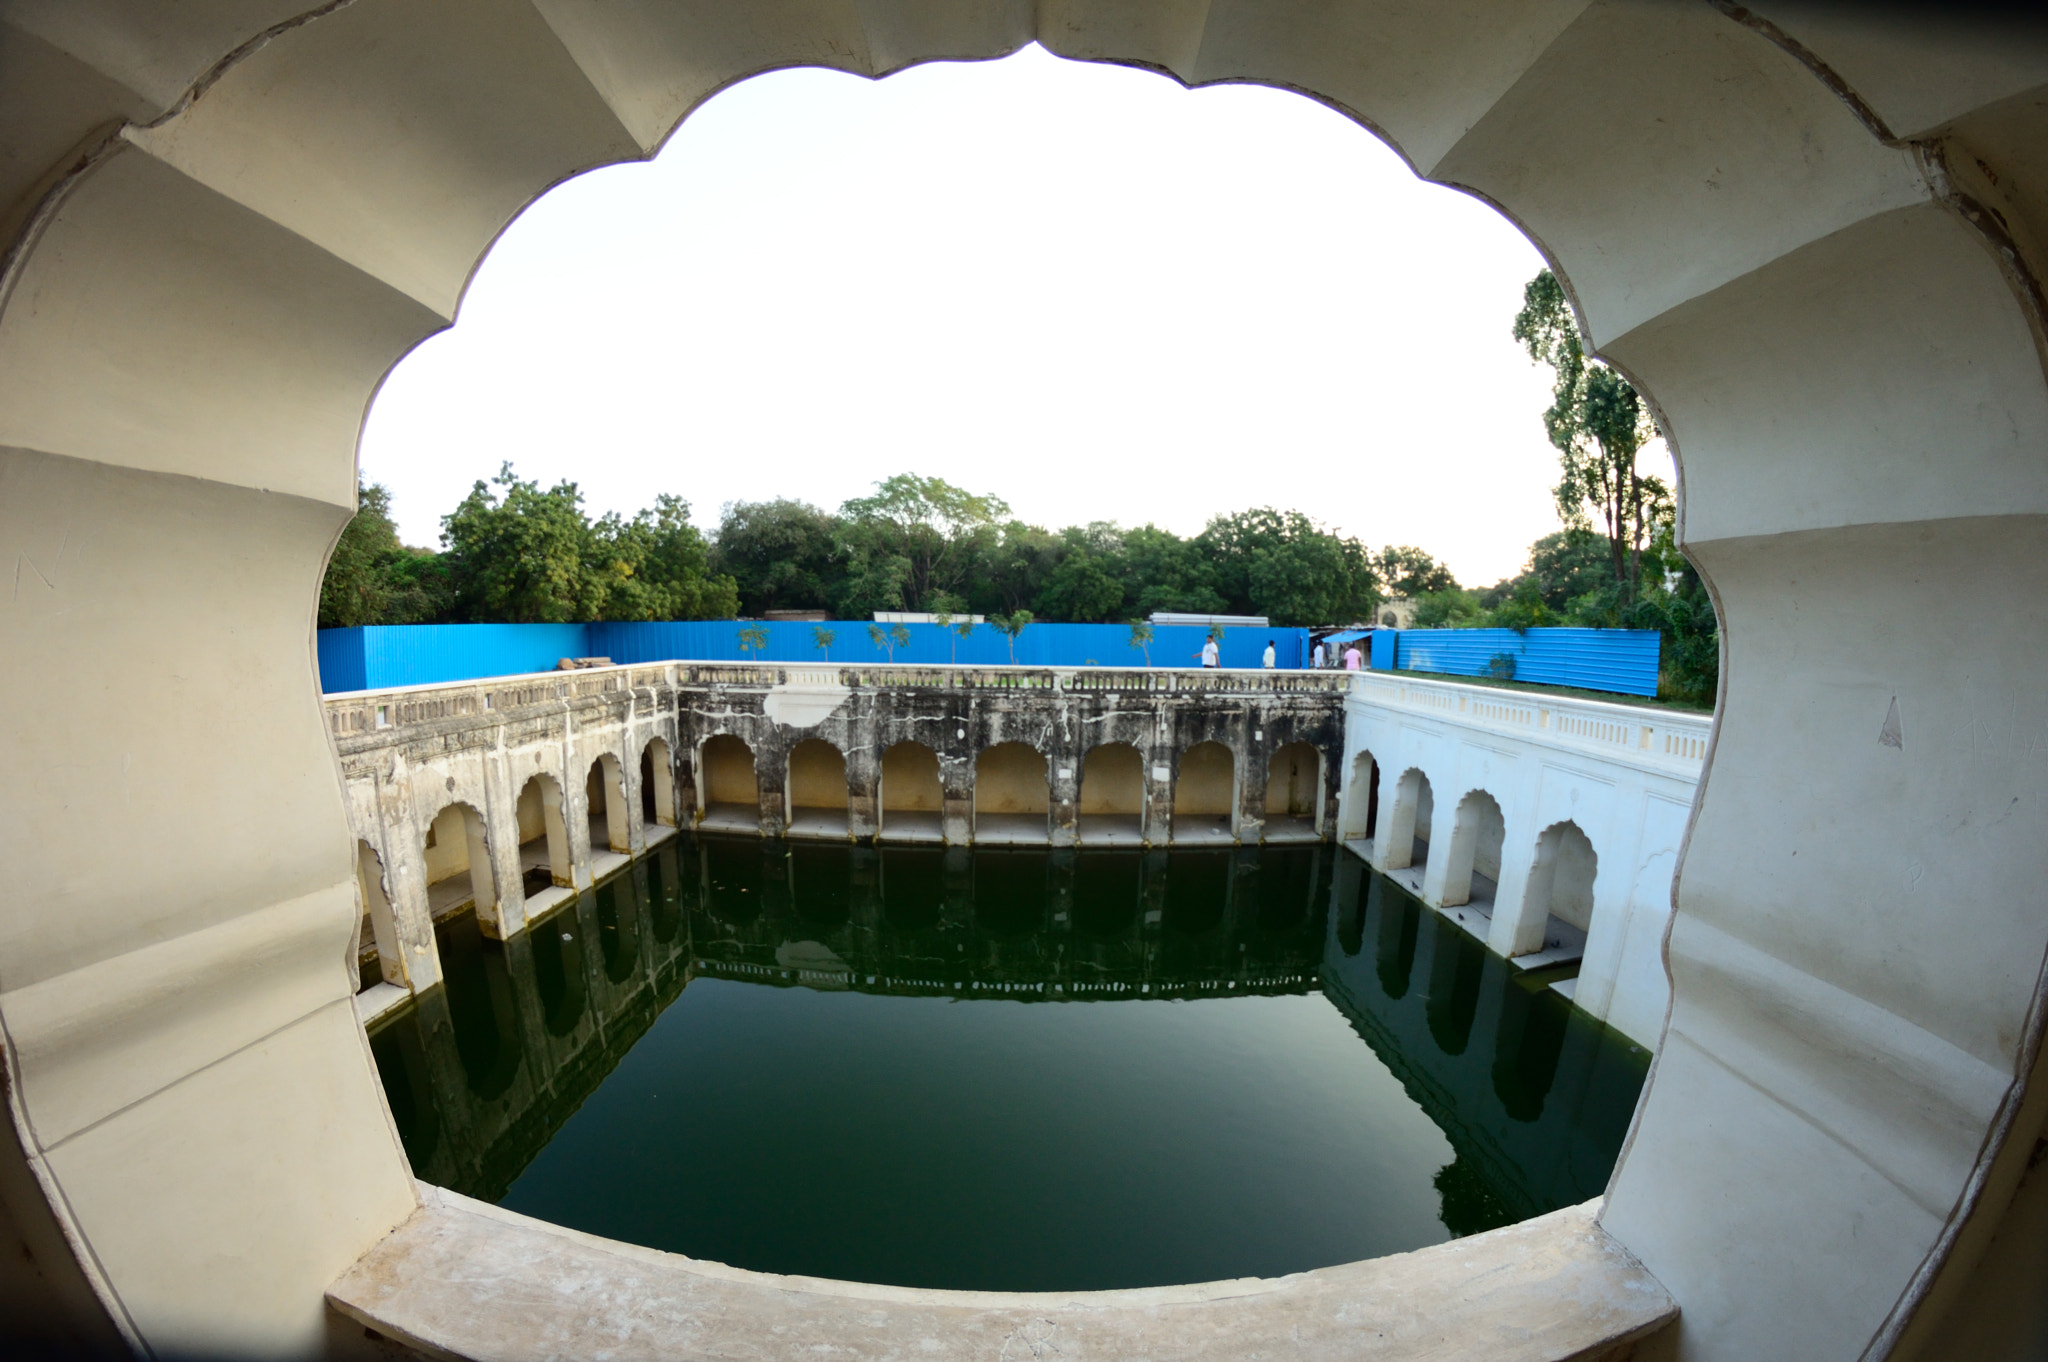 Samyang 8mm F3.5 Aspherical IF MC Fisheye sample photo. A well in qutub shah tombs, hyderabad, india photography